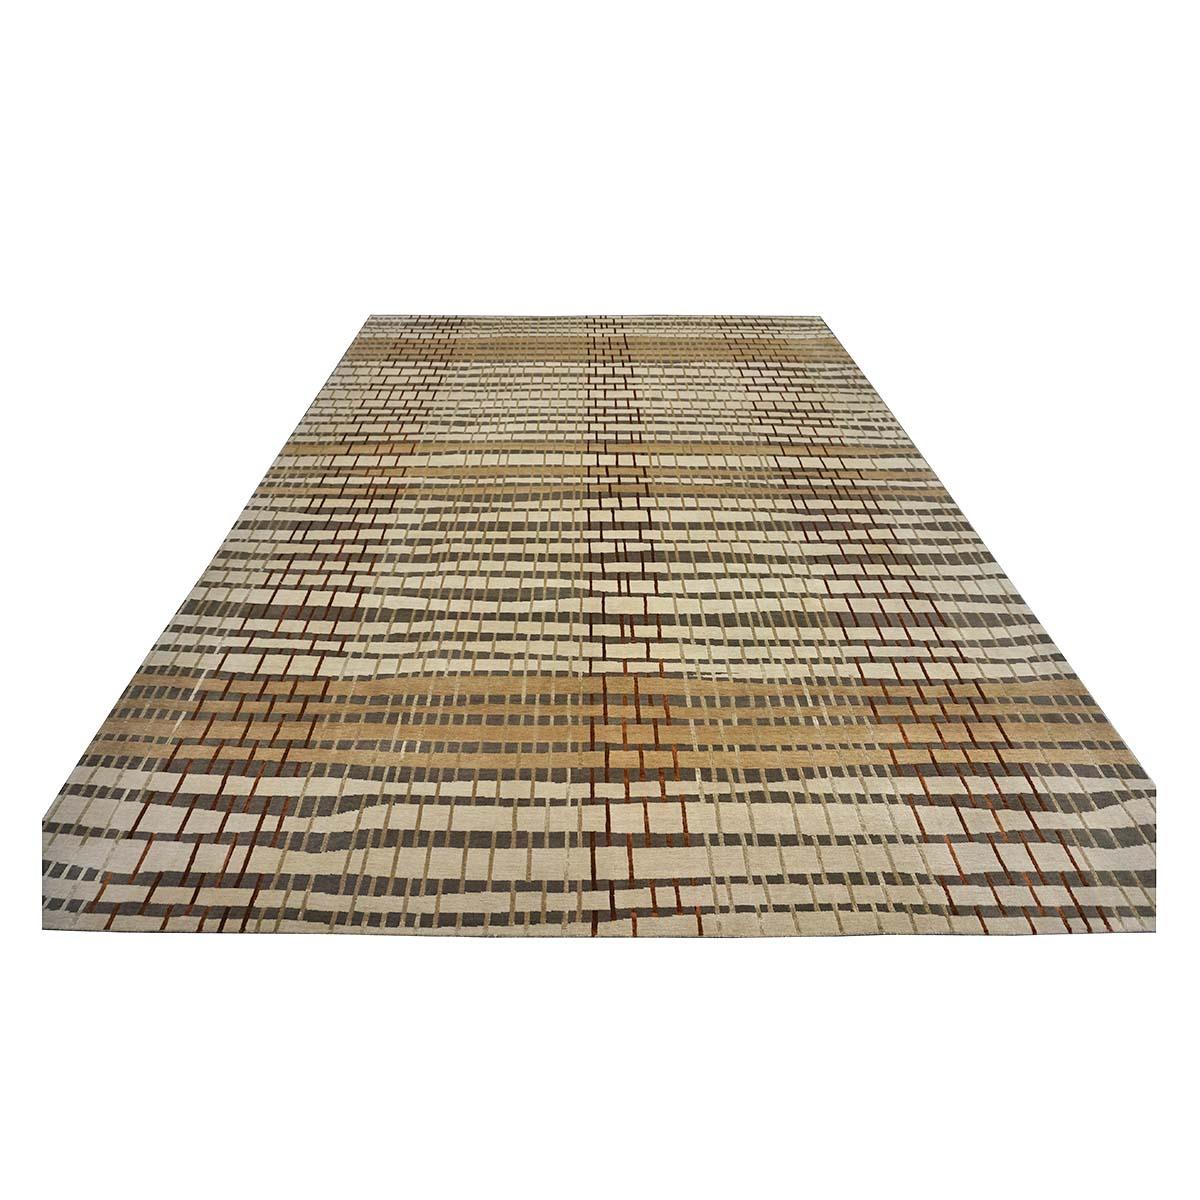  Ashly Fine Rugs presents a New Modern Inspired wool & silk 10x14 Tan, Ivory, & Rust Handmade Area Rug with lustrous shiny fibers and a thick durable pile. This gorgeous collection has been designed by our in-house designer and was 100% handmade by